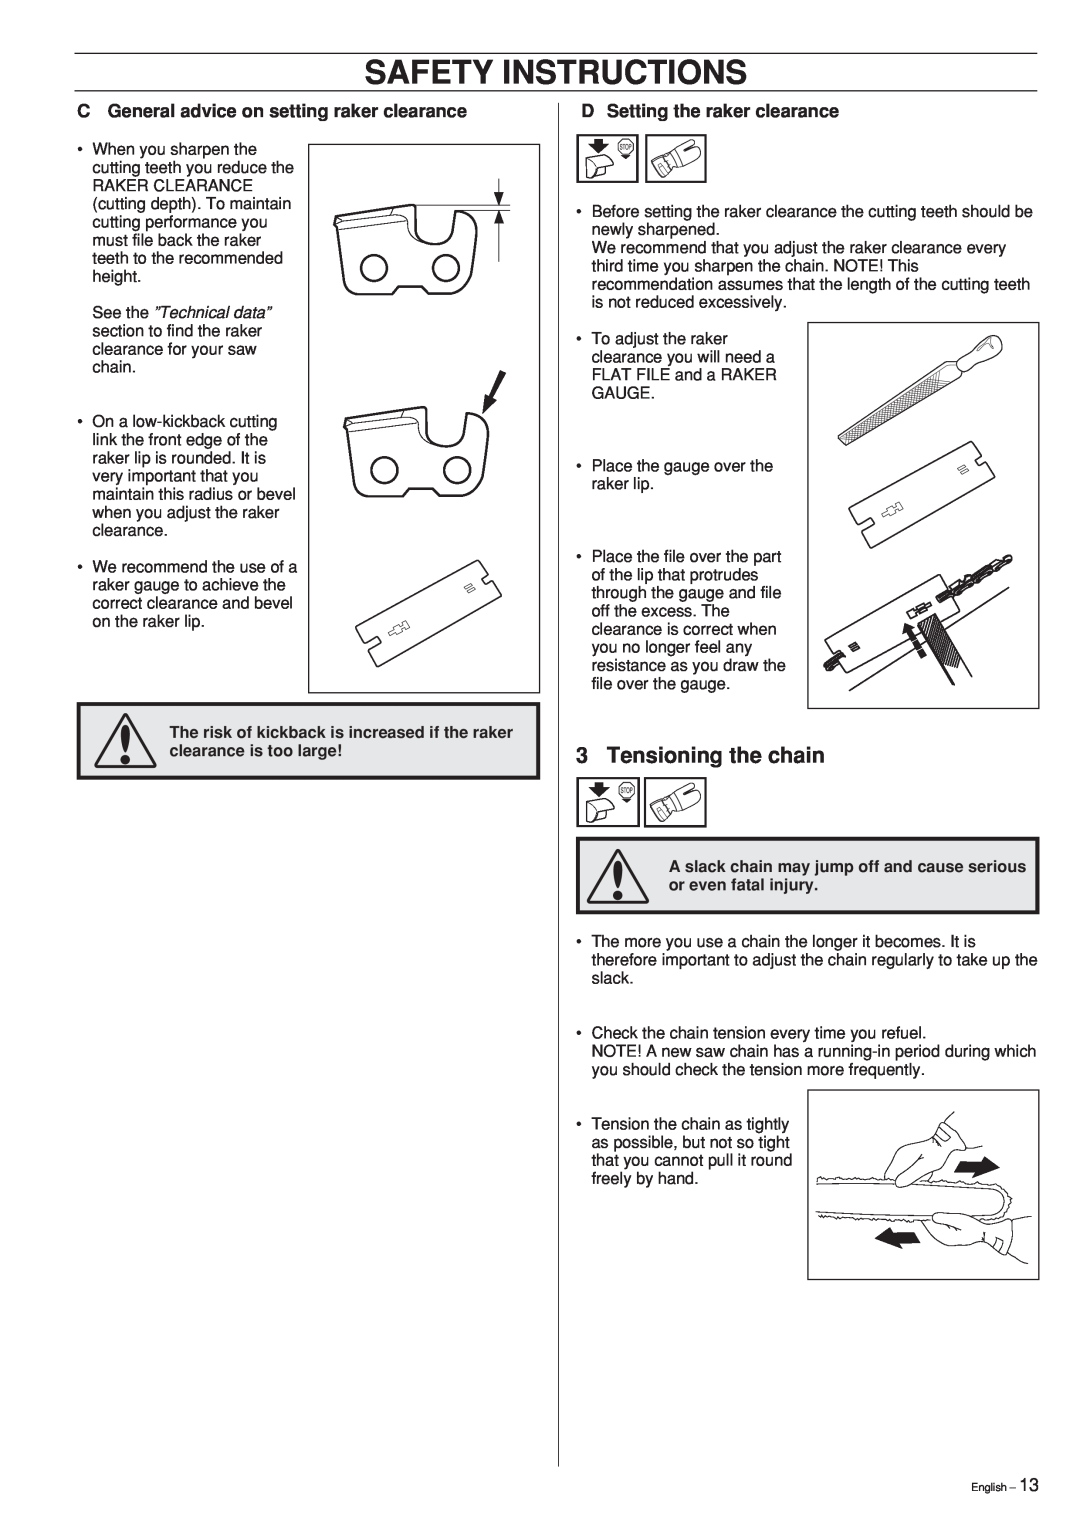 Husqvarna 346XP 351 manual Safety Instructions, Tensioning the chain, C General advice on setting raker clearance 